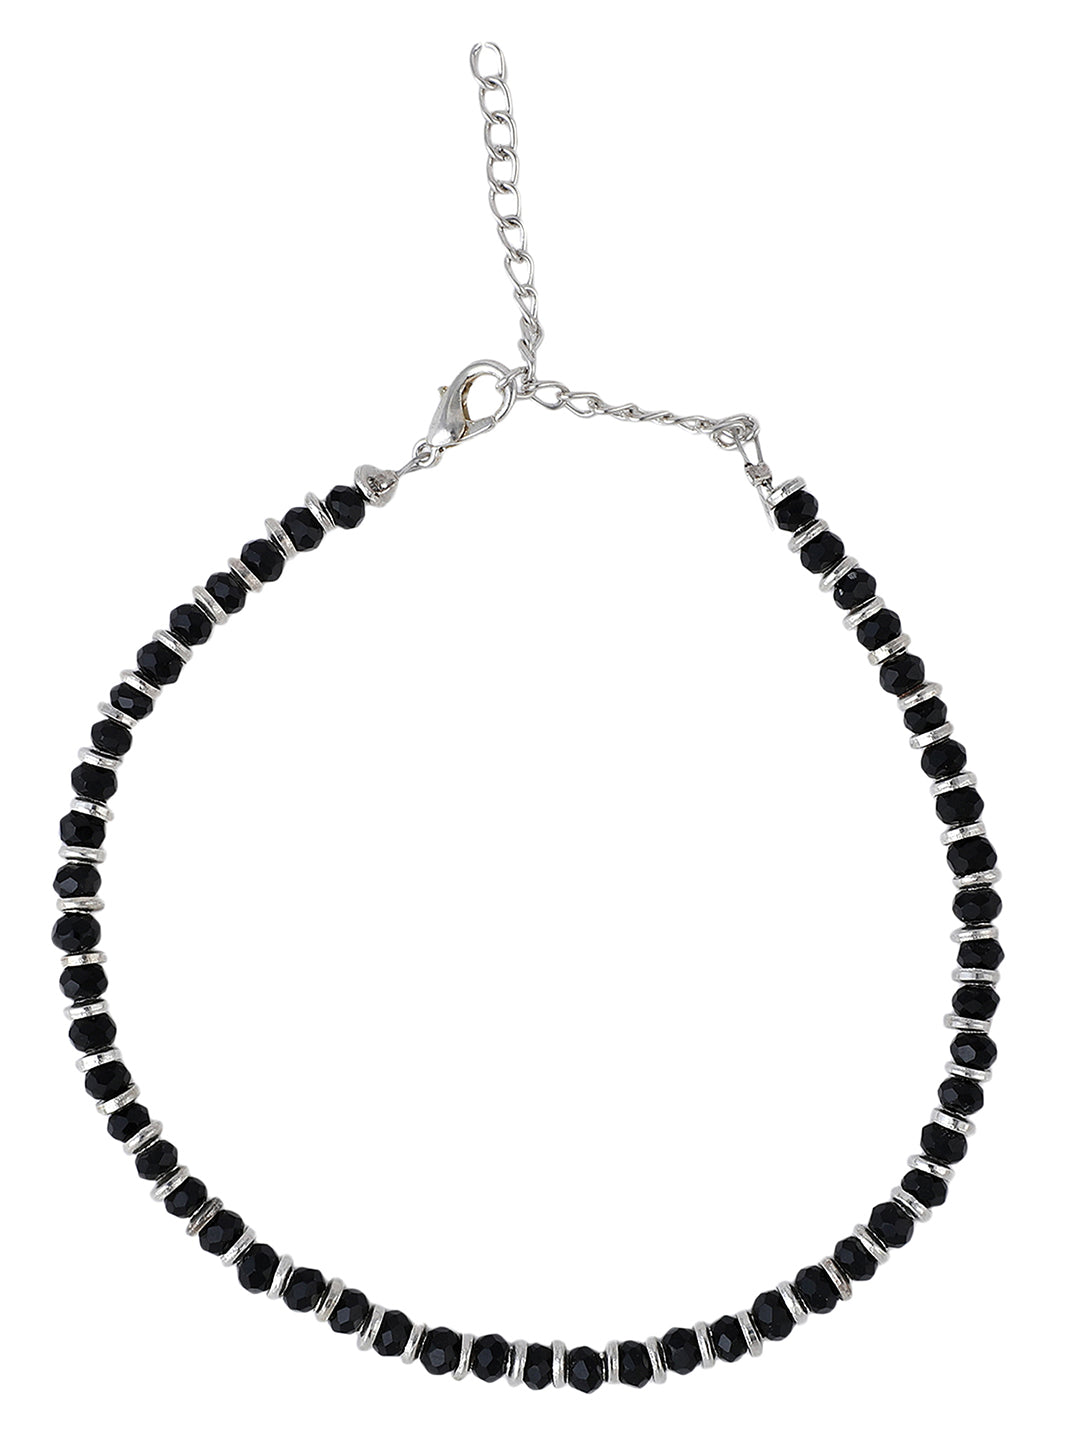 Women's Set Of 2 Classy Silver And Black Western Look Sleek Beads Anklet/Payal - Anikas Creation